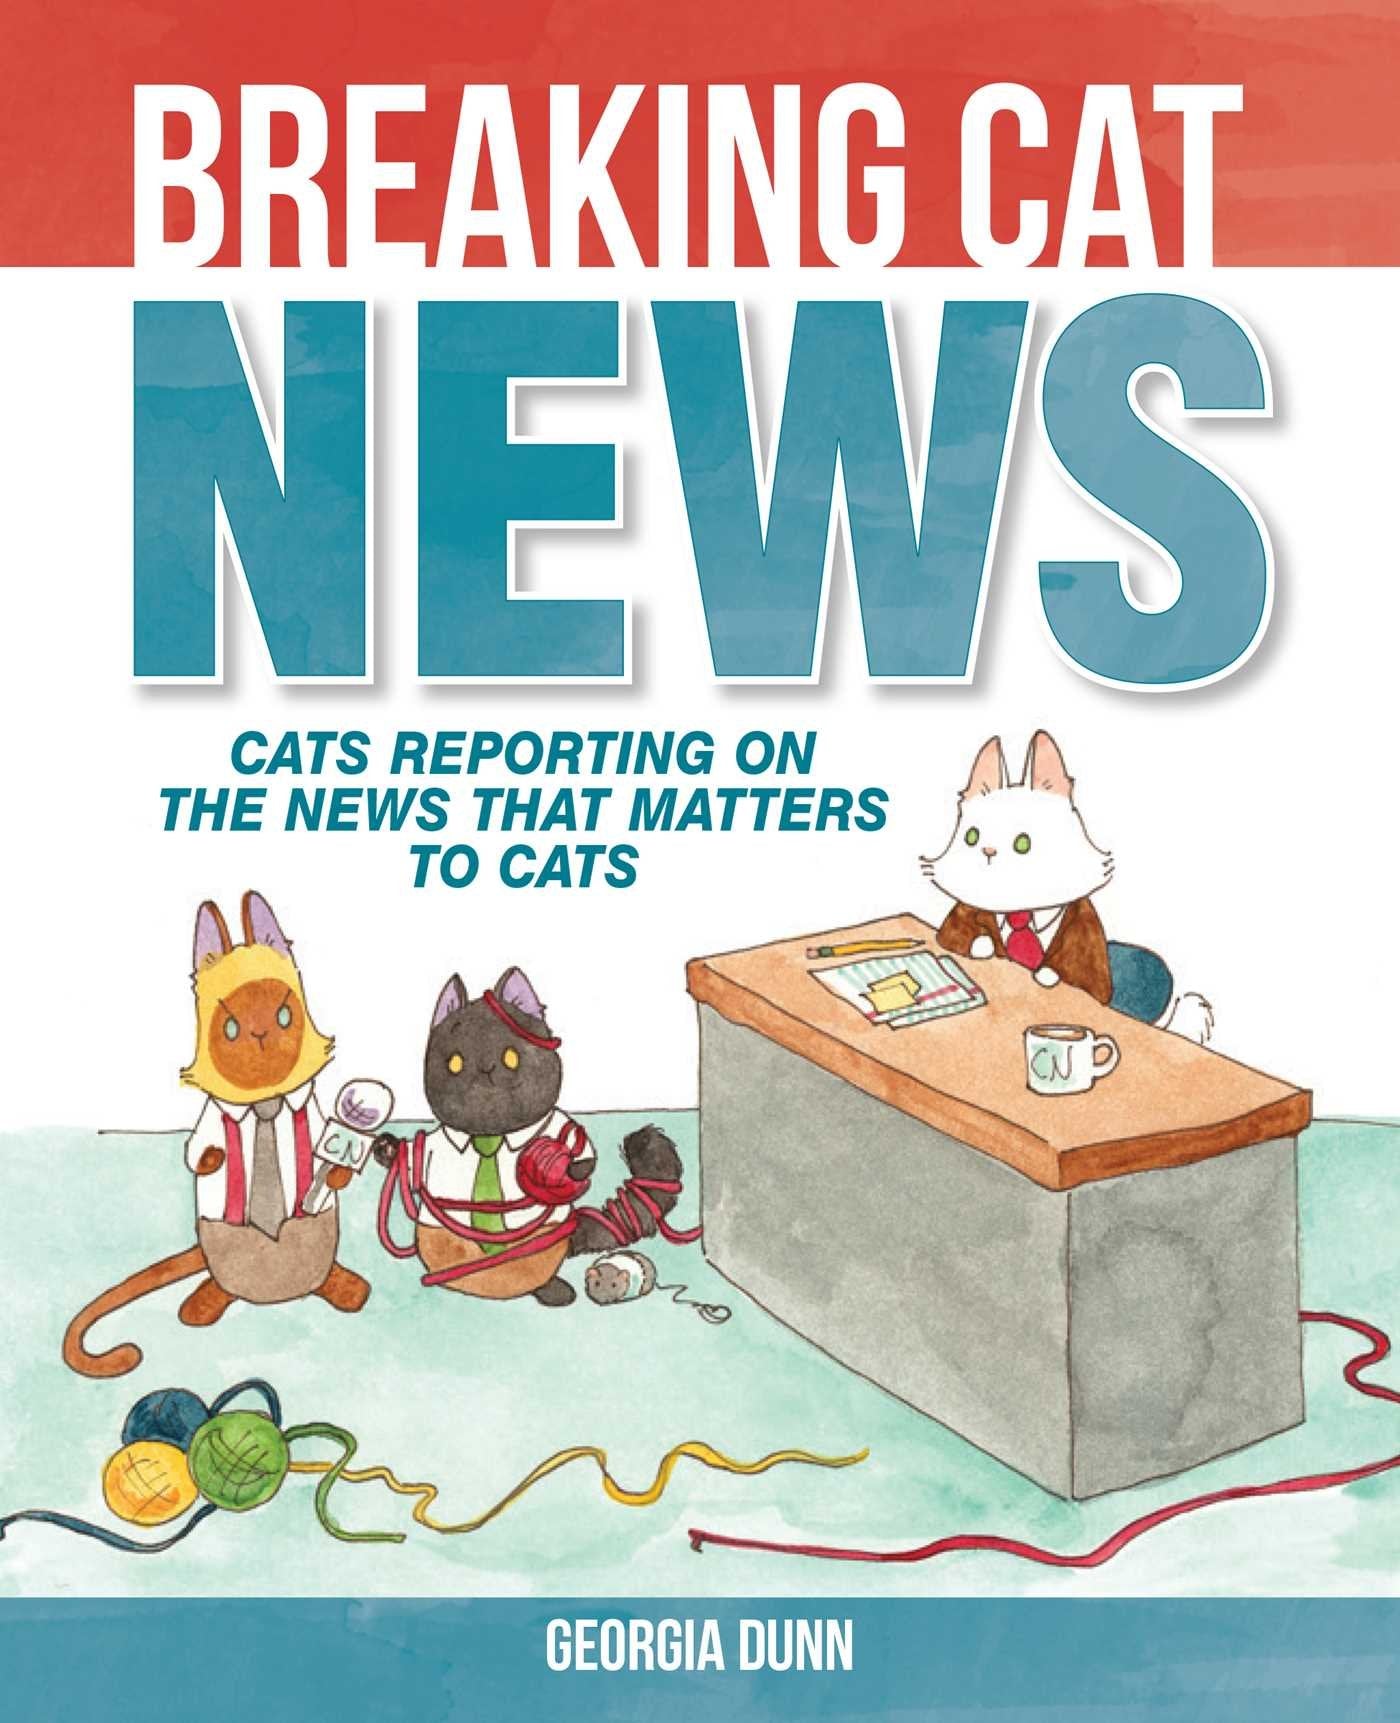 Breaking Cat News : Cats Reporting on the News That Matters to Cats by Georgia Dunn